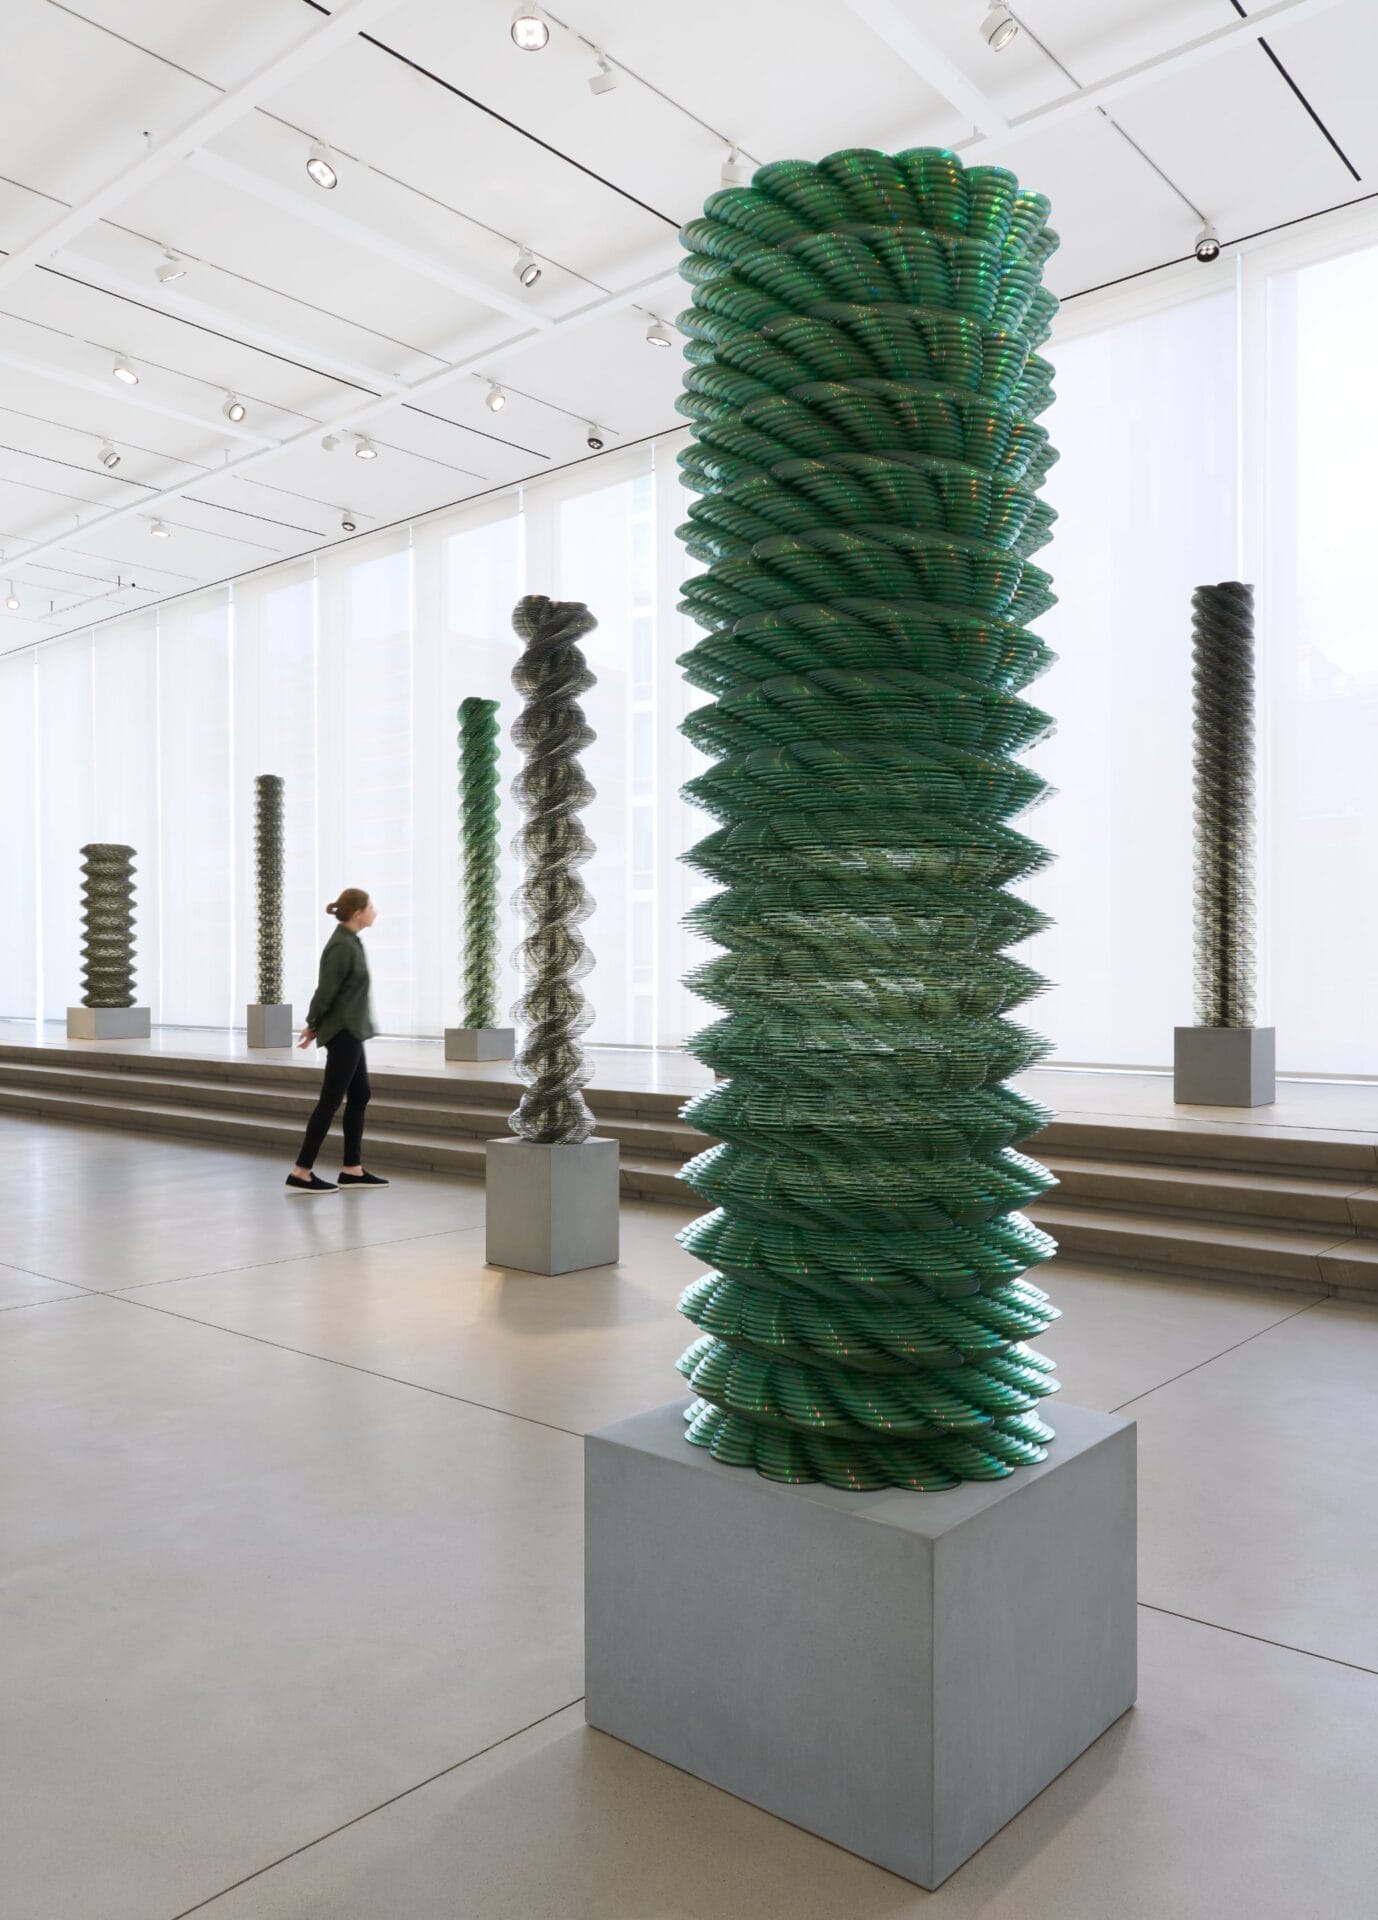 Tara Donovan Layers 200,000 CDs into Twisting Totems of Physical Data